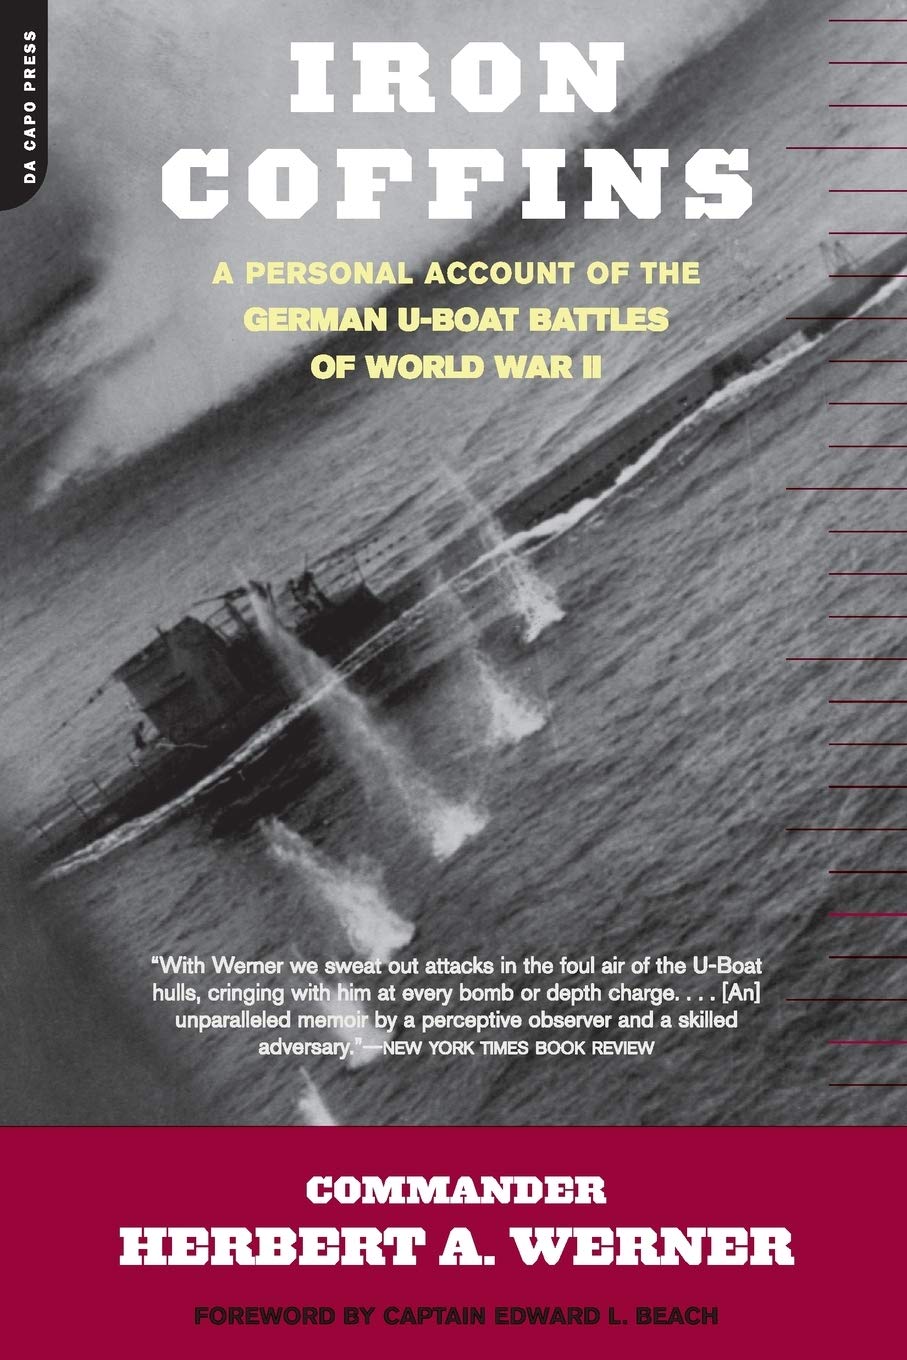 Iron coffins : a personal account of the German U-Boat battles of World War II